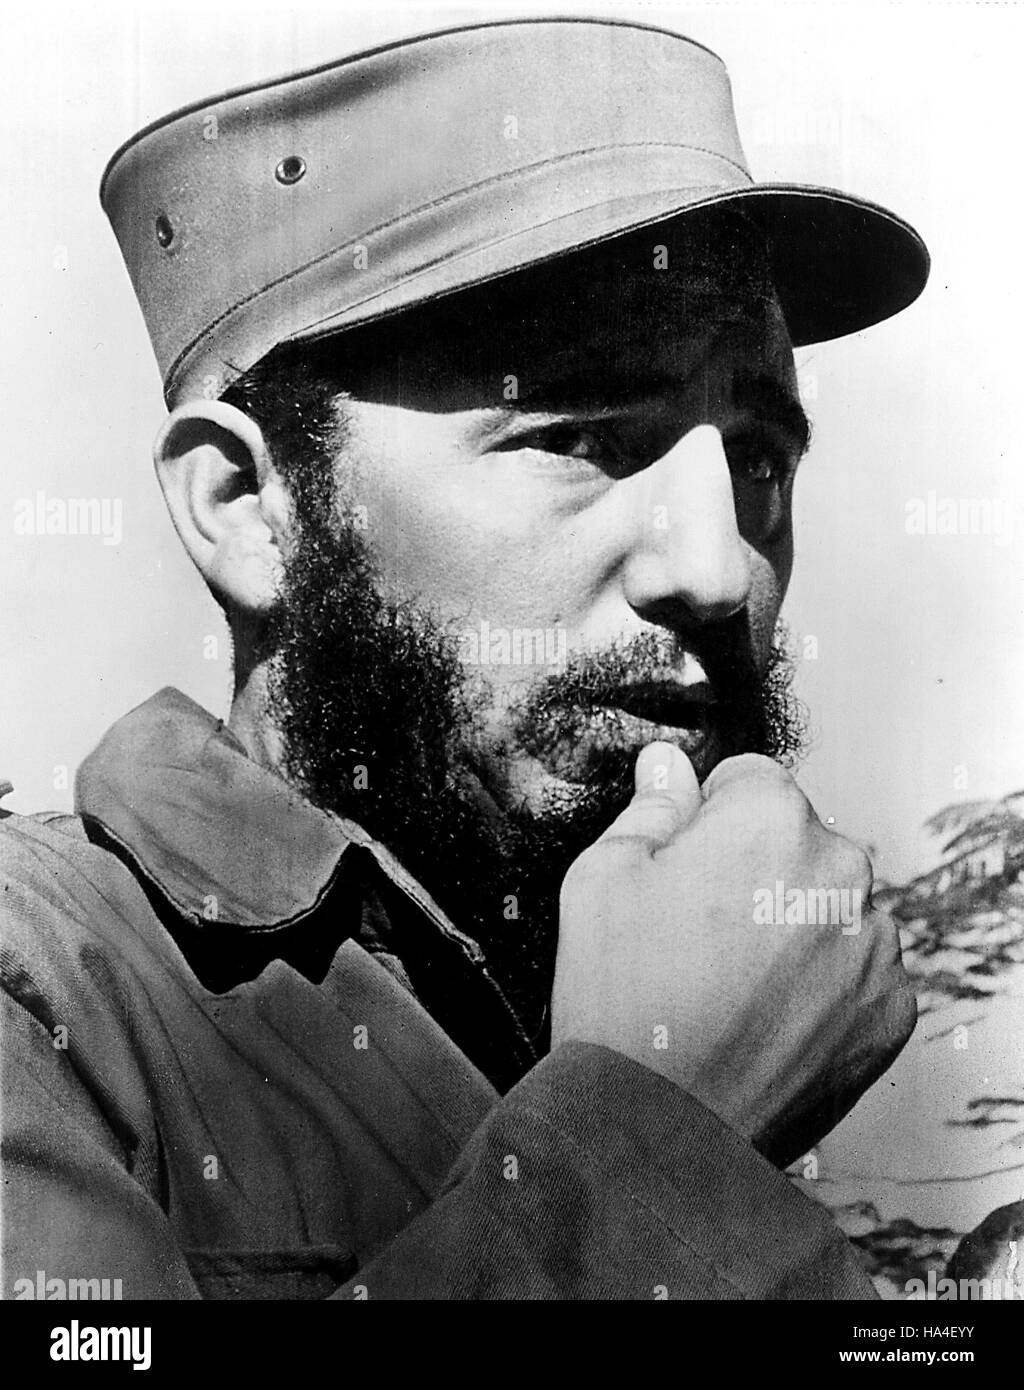 FIDEL ALEJANDRO CASTRO RUZ (August 13, 1926 - November 25, 2016), commonly known as Fidel Castro, was a Cuban politician and revolutionary who governed the Republic of Cuba as Prime Minister from 1959 to 1976 and then as President from 1976 to 2008. Castro was a controversial and divisive world figure. FILE PICTURE: Fidel Castro. 1966. © Globe Photos/ZUMAPRESS.com/Alamy Live News Stock Photo